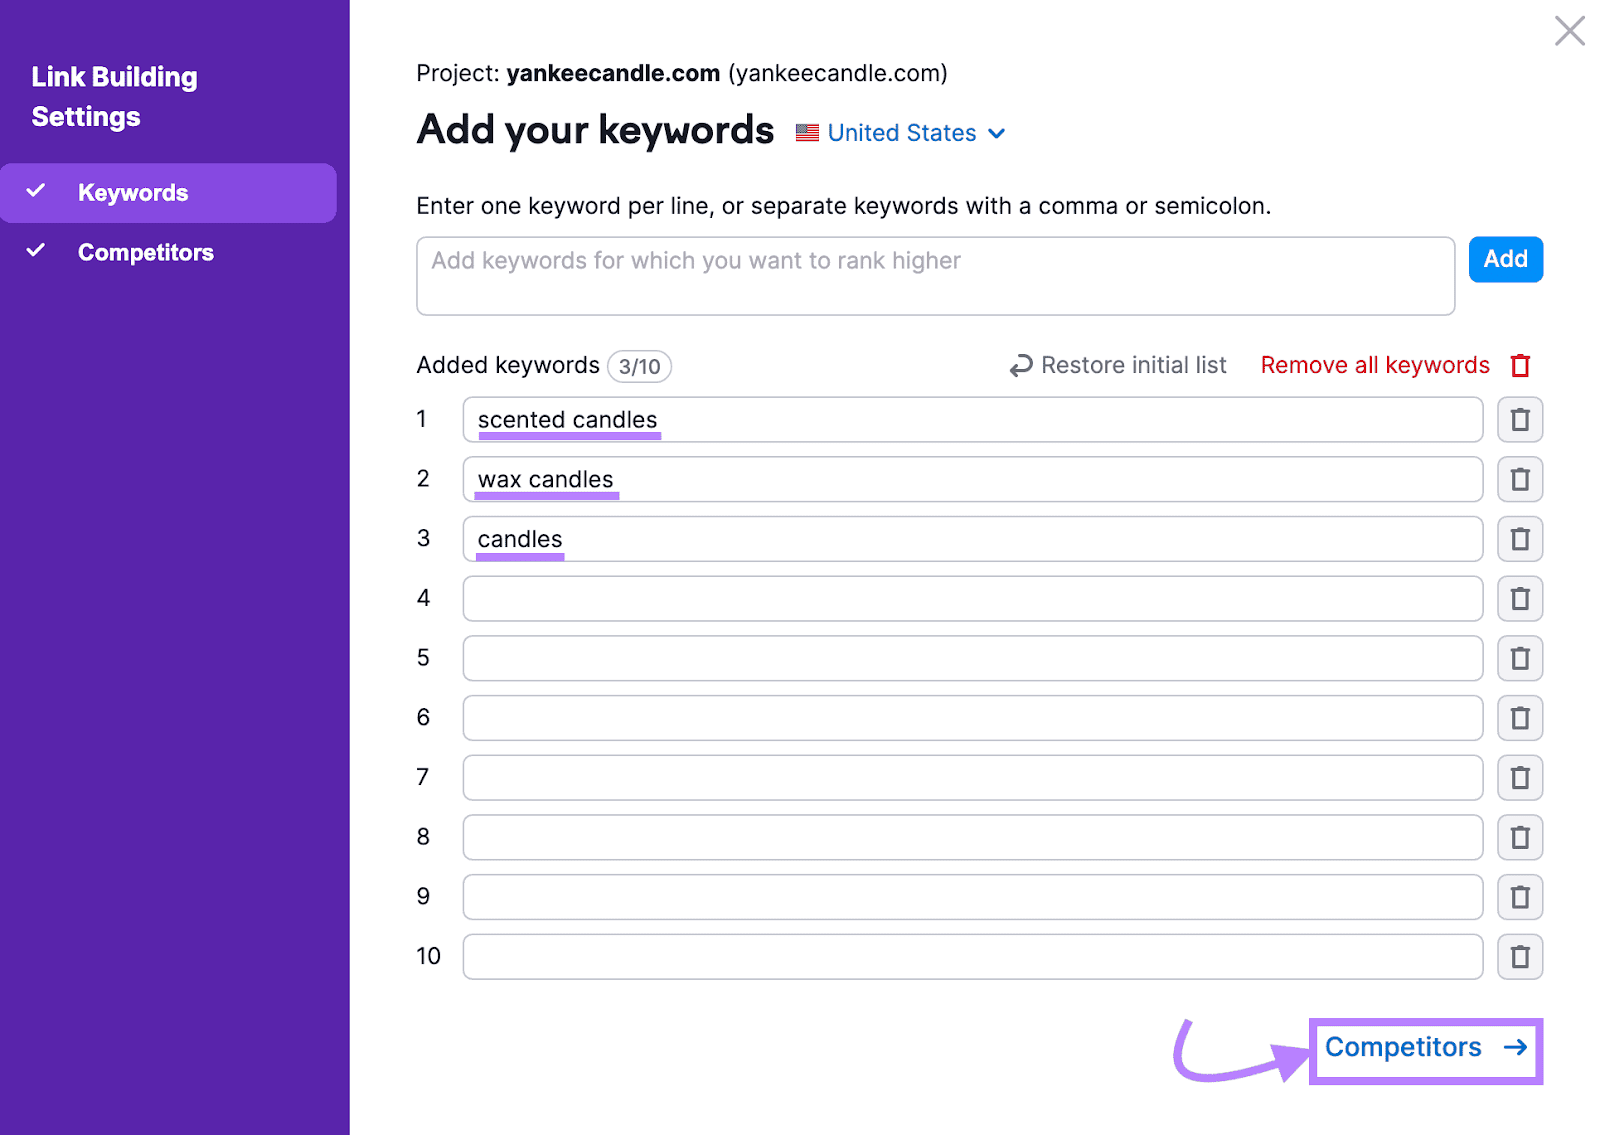 "Add your keywords" window in Link Building Settings